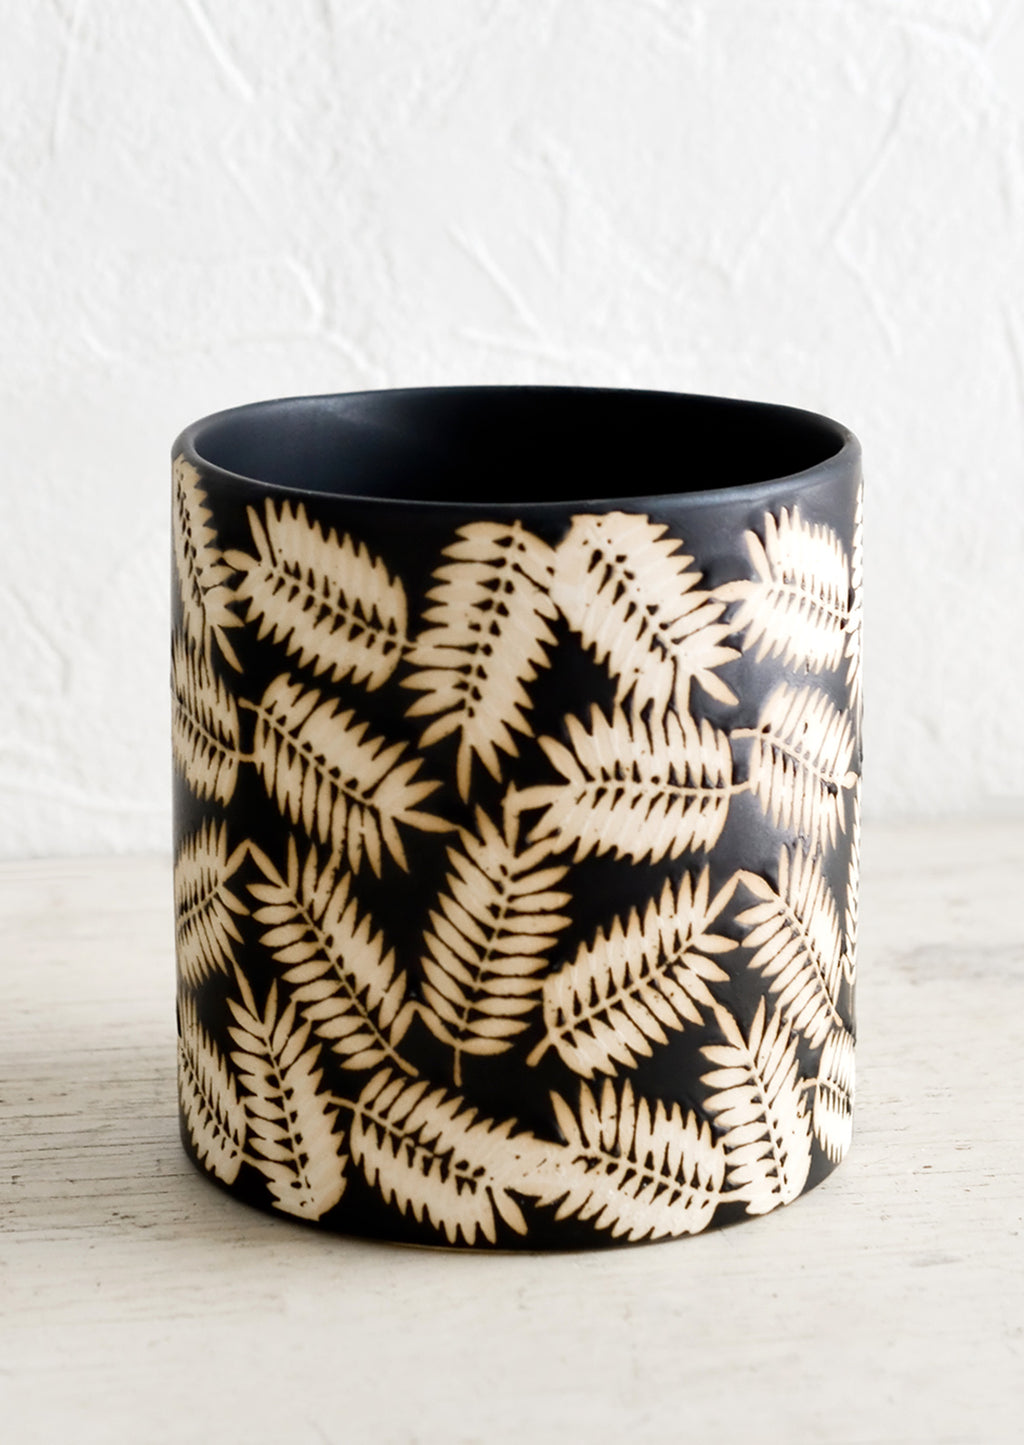 1: A round black ceramic planter with resist print of palm leaves.